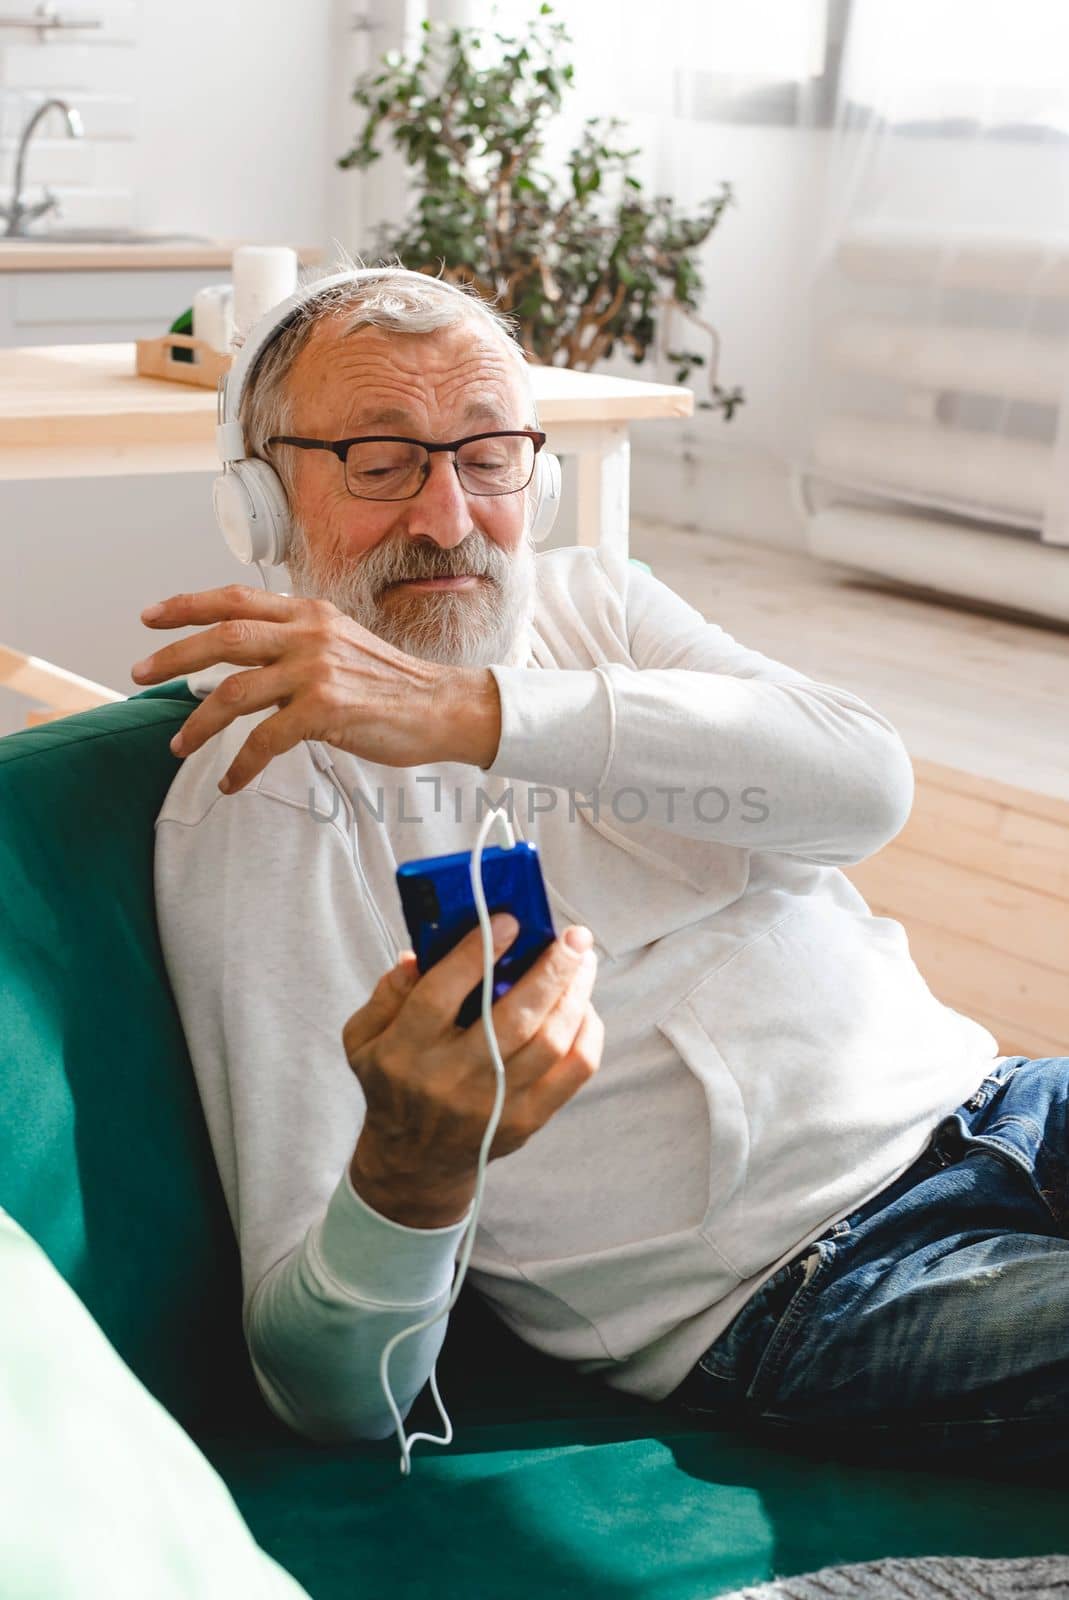 Elderly man cool bearded old man using mobile phone for video call - happiness elderly lifestyle people concept. Video call on smartphone in room waving to screen and chatting with children - modern technologies communication and internet by Satura86